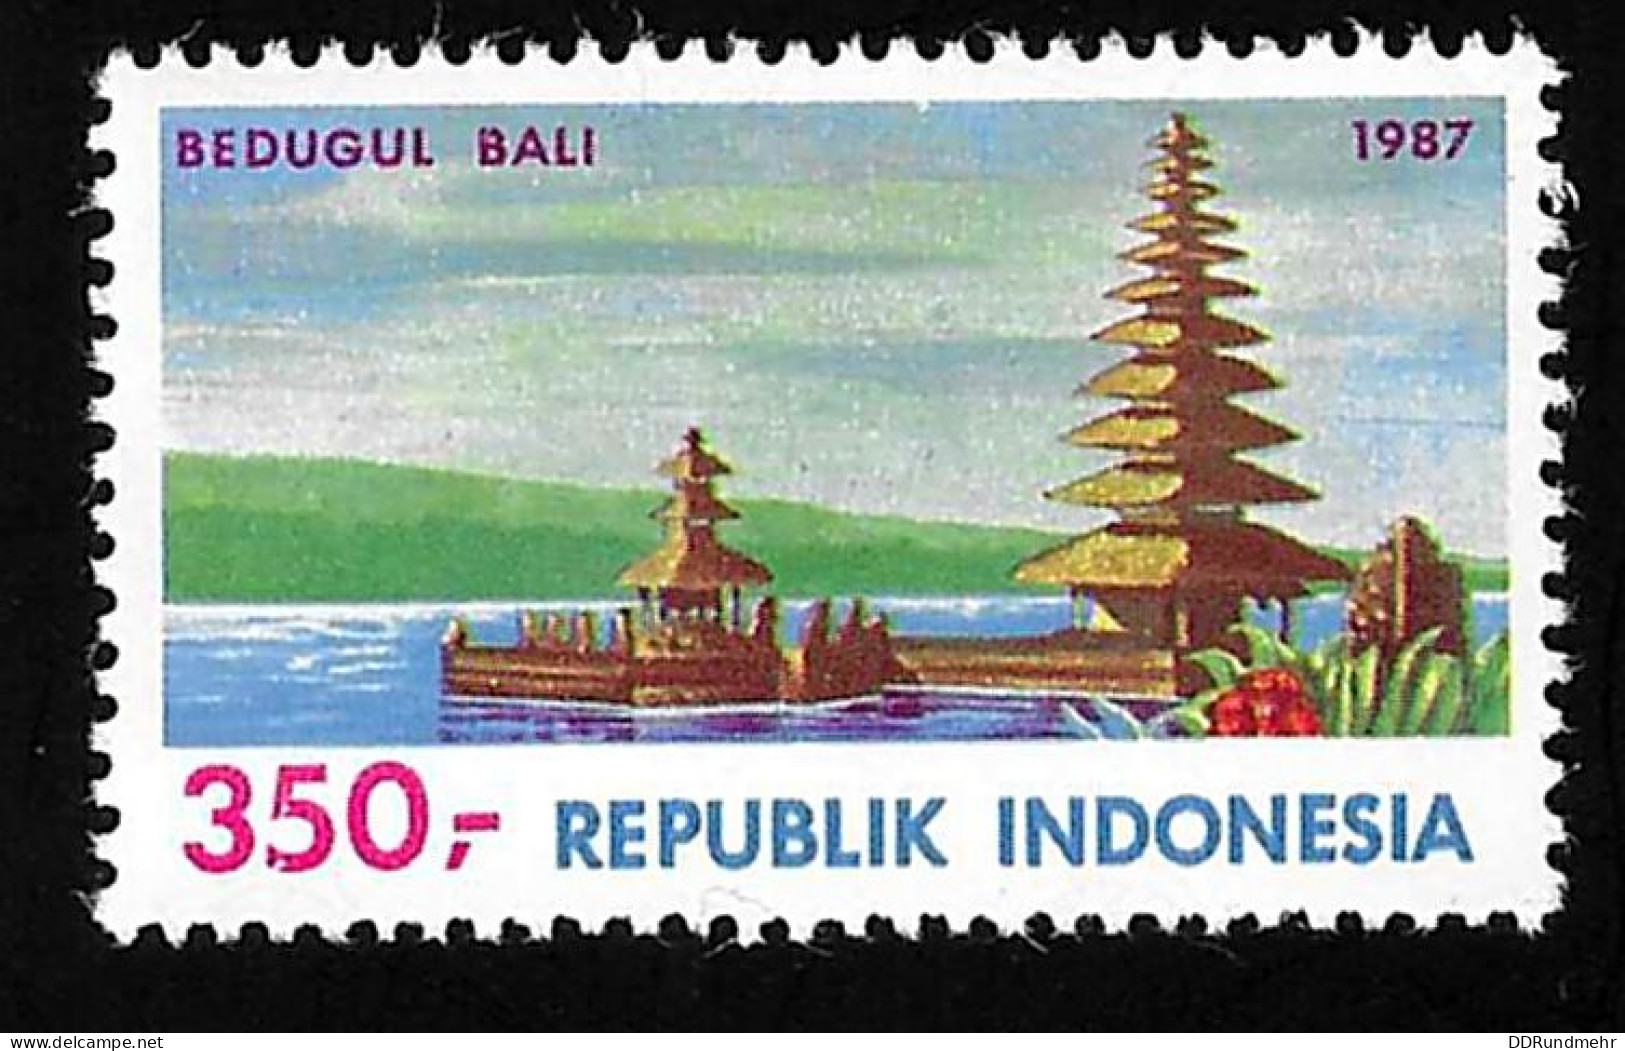 1987 Bedogul  Michel ID 1238 Stamp Number ID 1330 Yvert Et Tellier ID 1126 Stanley Gibbons ID 1861 Xx MNH - Indonesien